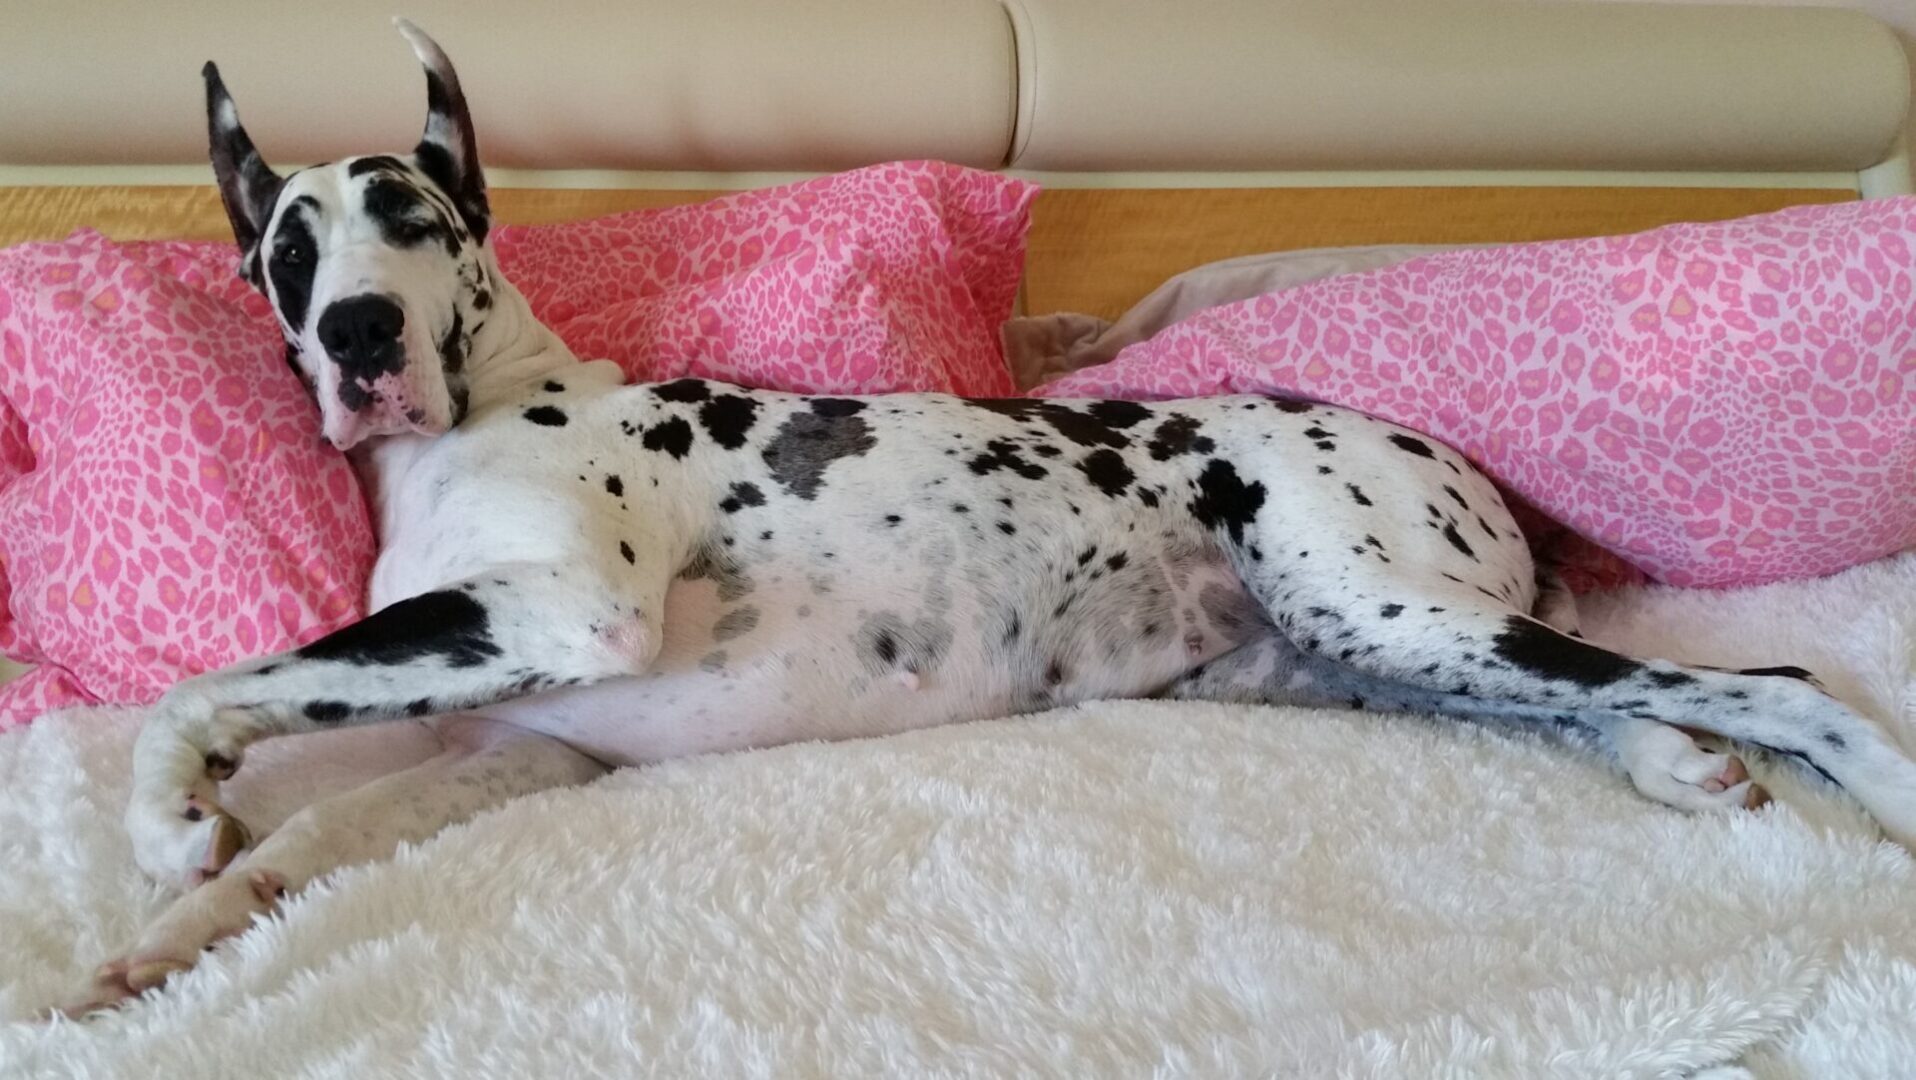 A dalmatian dog laying on top of a bed.